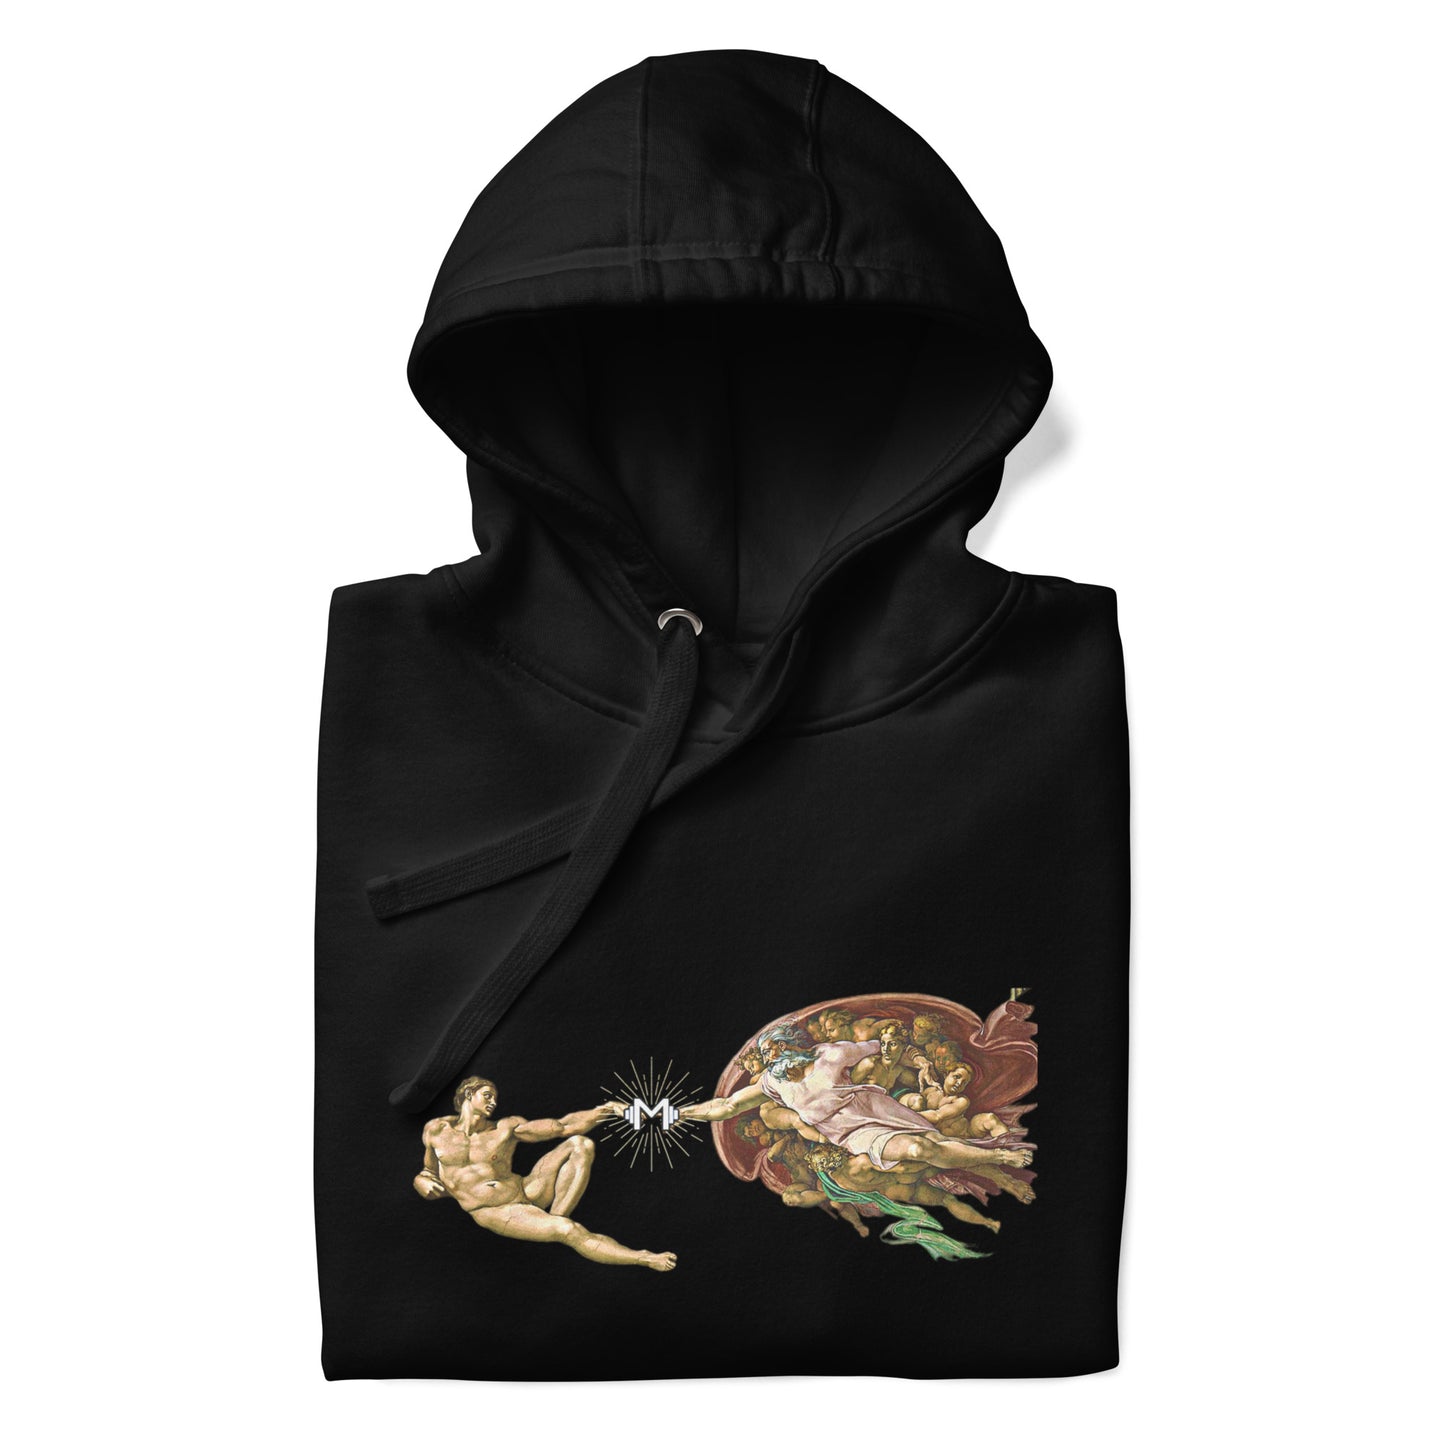 Creation of Mass Cast Soft Style Hoodie